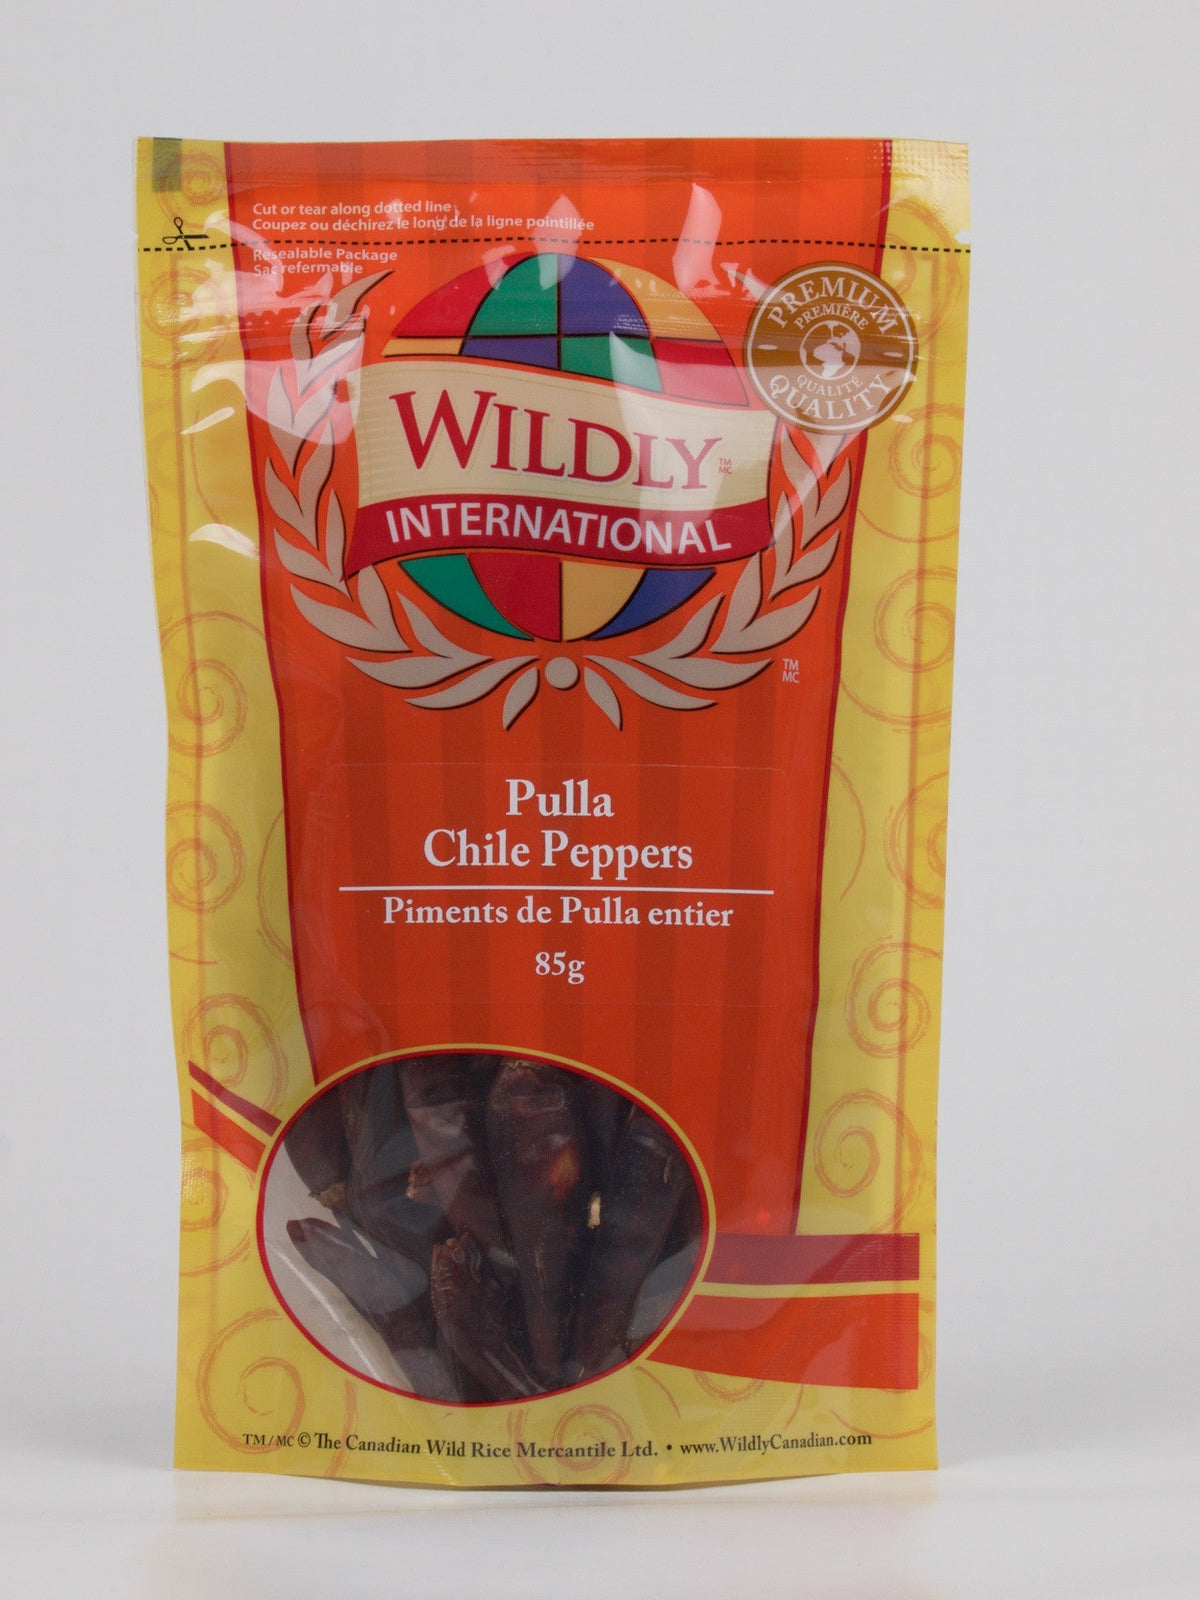 Pulla Chile Peppers